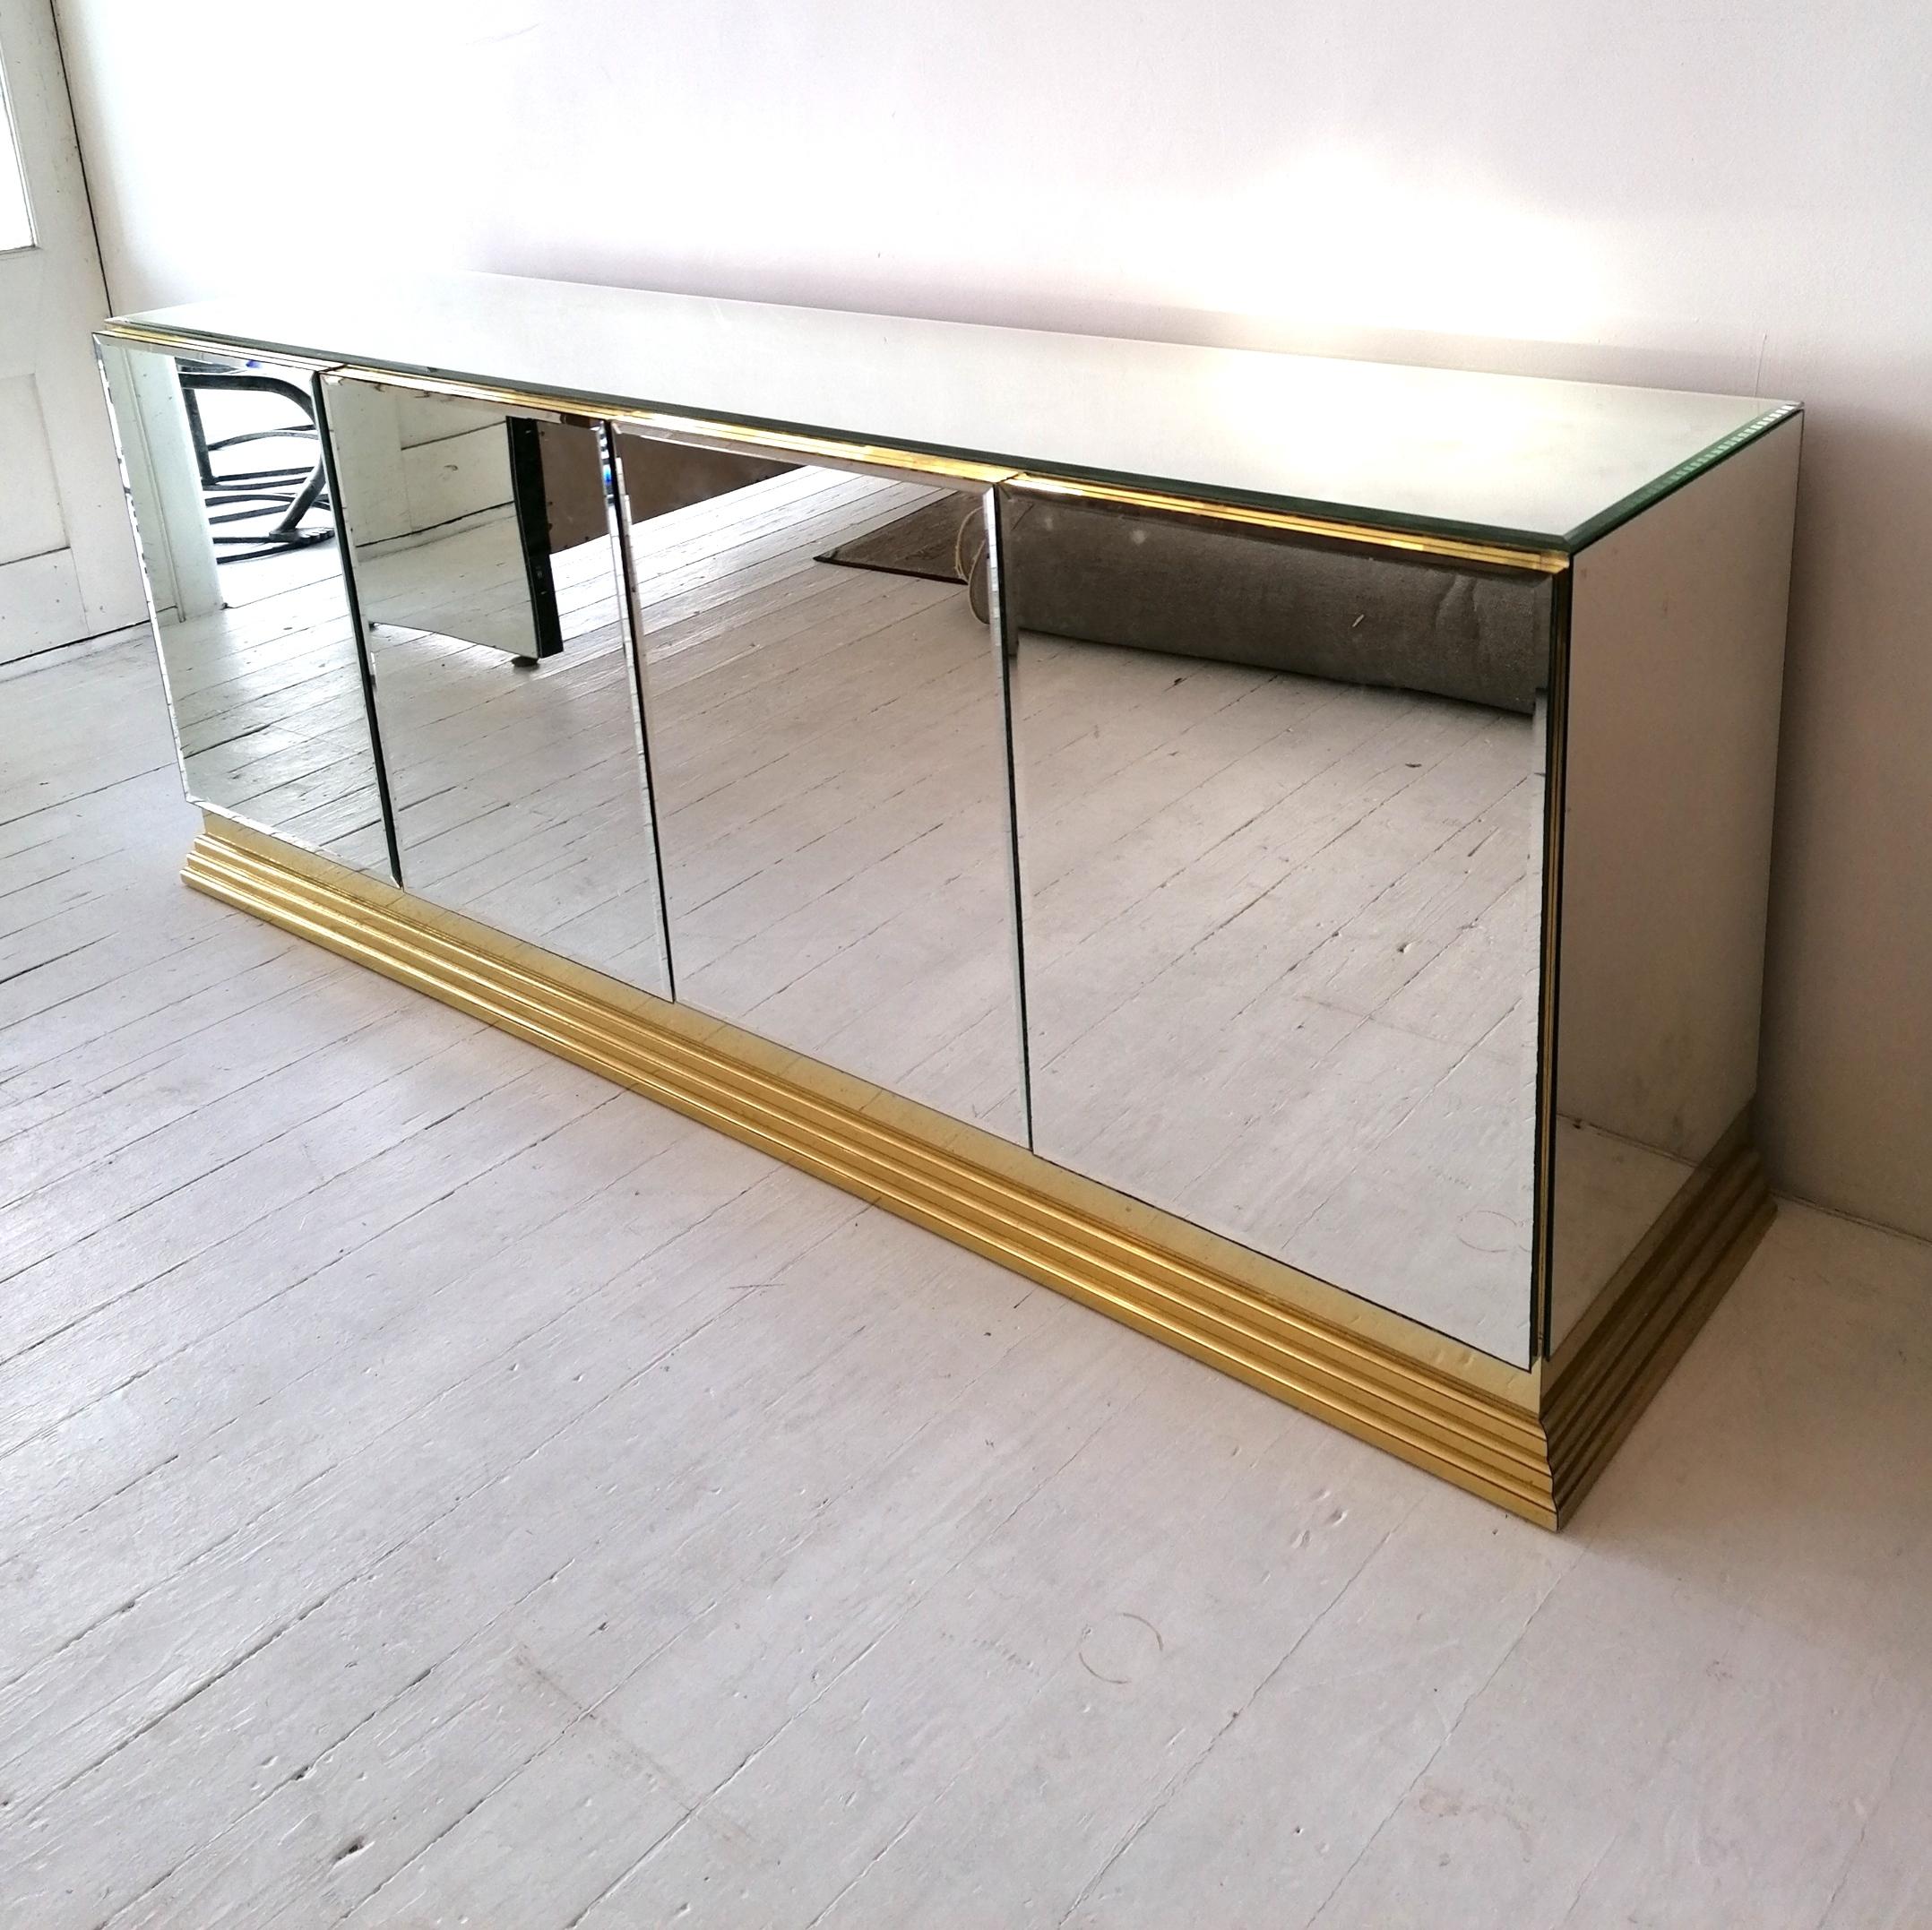 Post-Modern Vintage Mirrored Sideboard with Brass Base, by Ello Furniture USA, 1970s / 80s